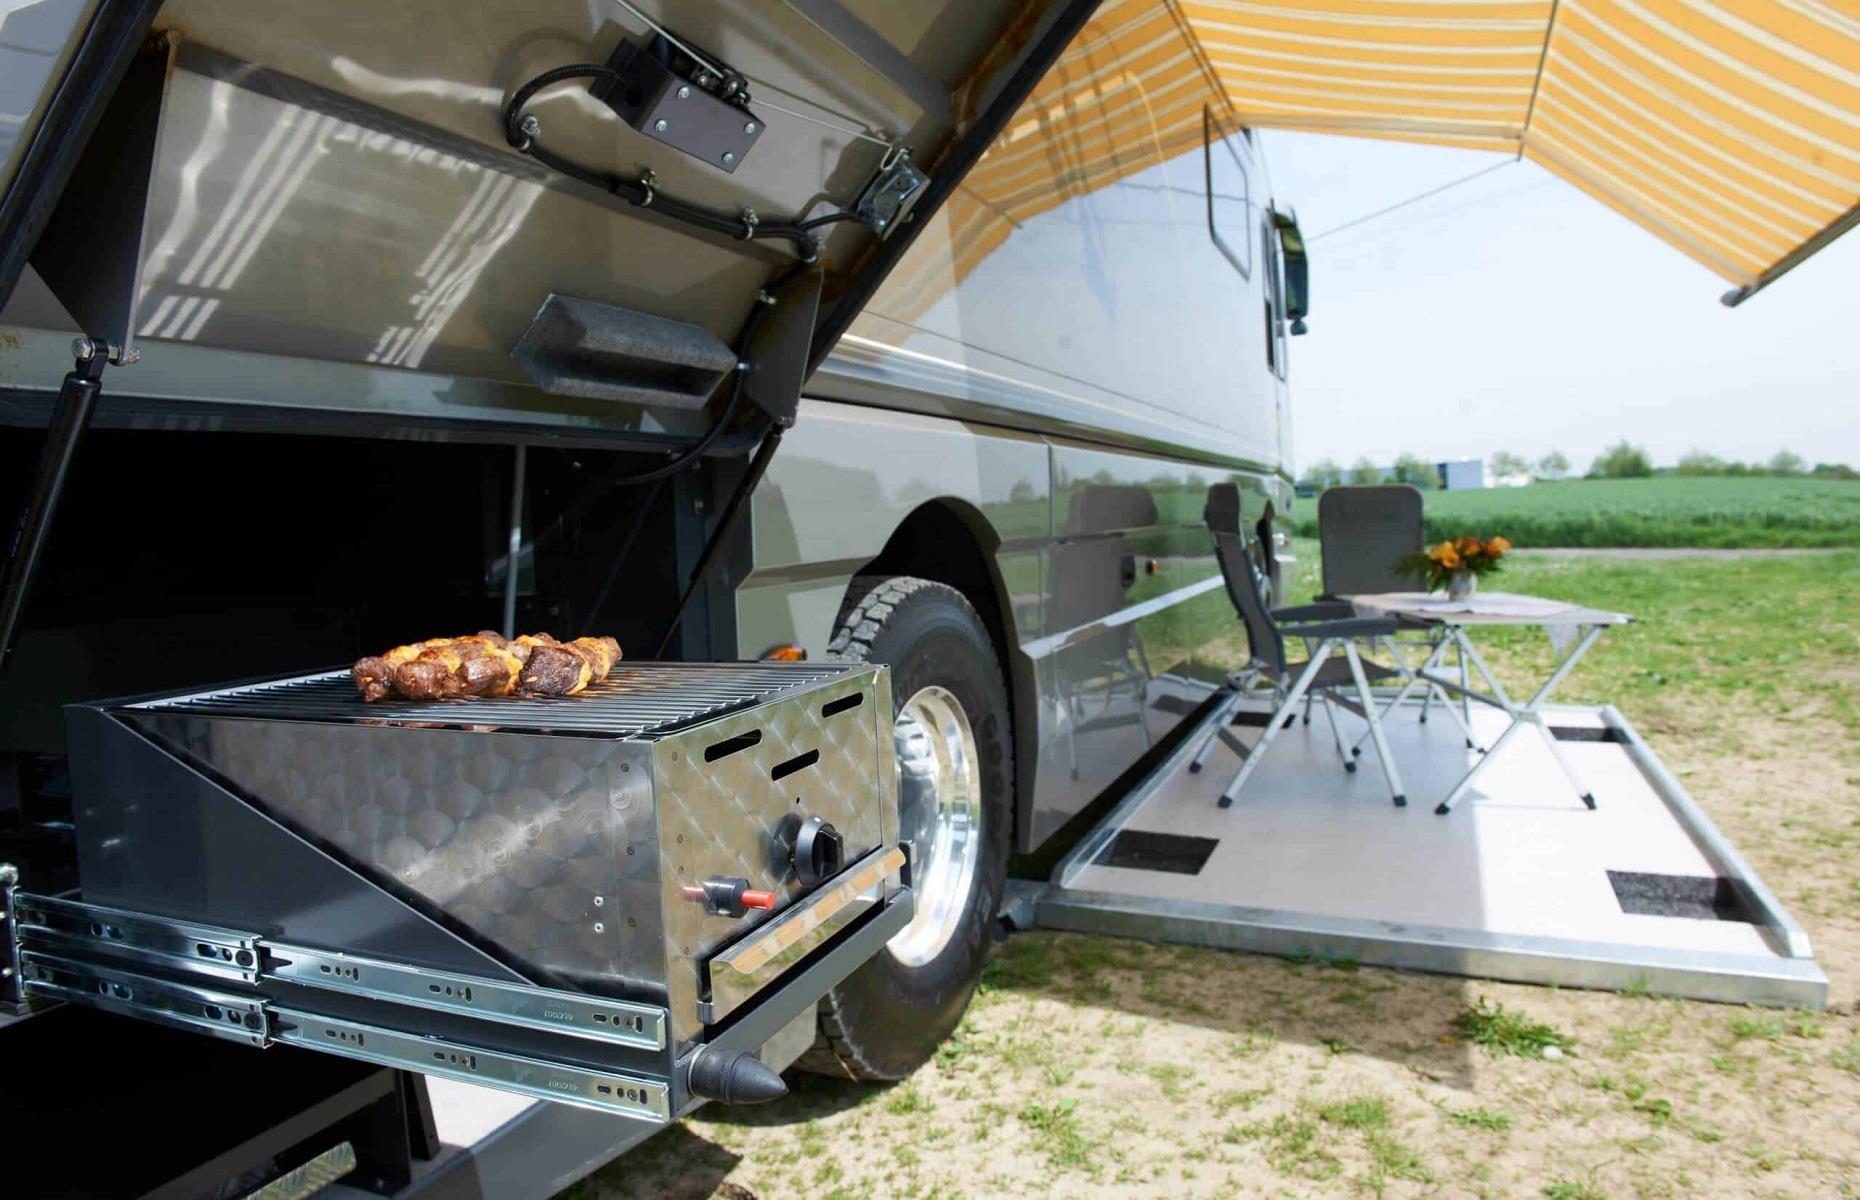 <p>Plus, the home’s climate control system is second to none, creating a comfortable living space all year round. And, according to <a href="https://uk.motor1.com/news/531655/volkner-motorhome-carries-bugatti-chiron/">motor1.com</a>, the motorhome comes equipped with a high-end, Burmester stereo that's responsible for €300,000, or $326,000 of that hefty price tag! If you're planning on taking yours to sunny climes, you can even add a built-in, retractable barbeque and dine under your very own extendable canopy. Perfection!</p>